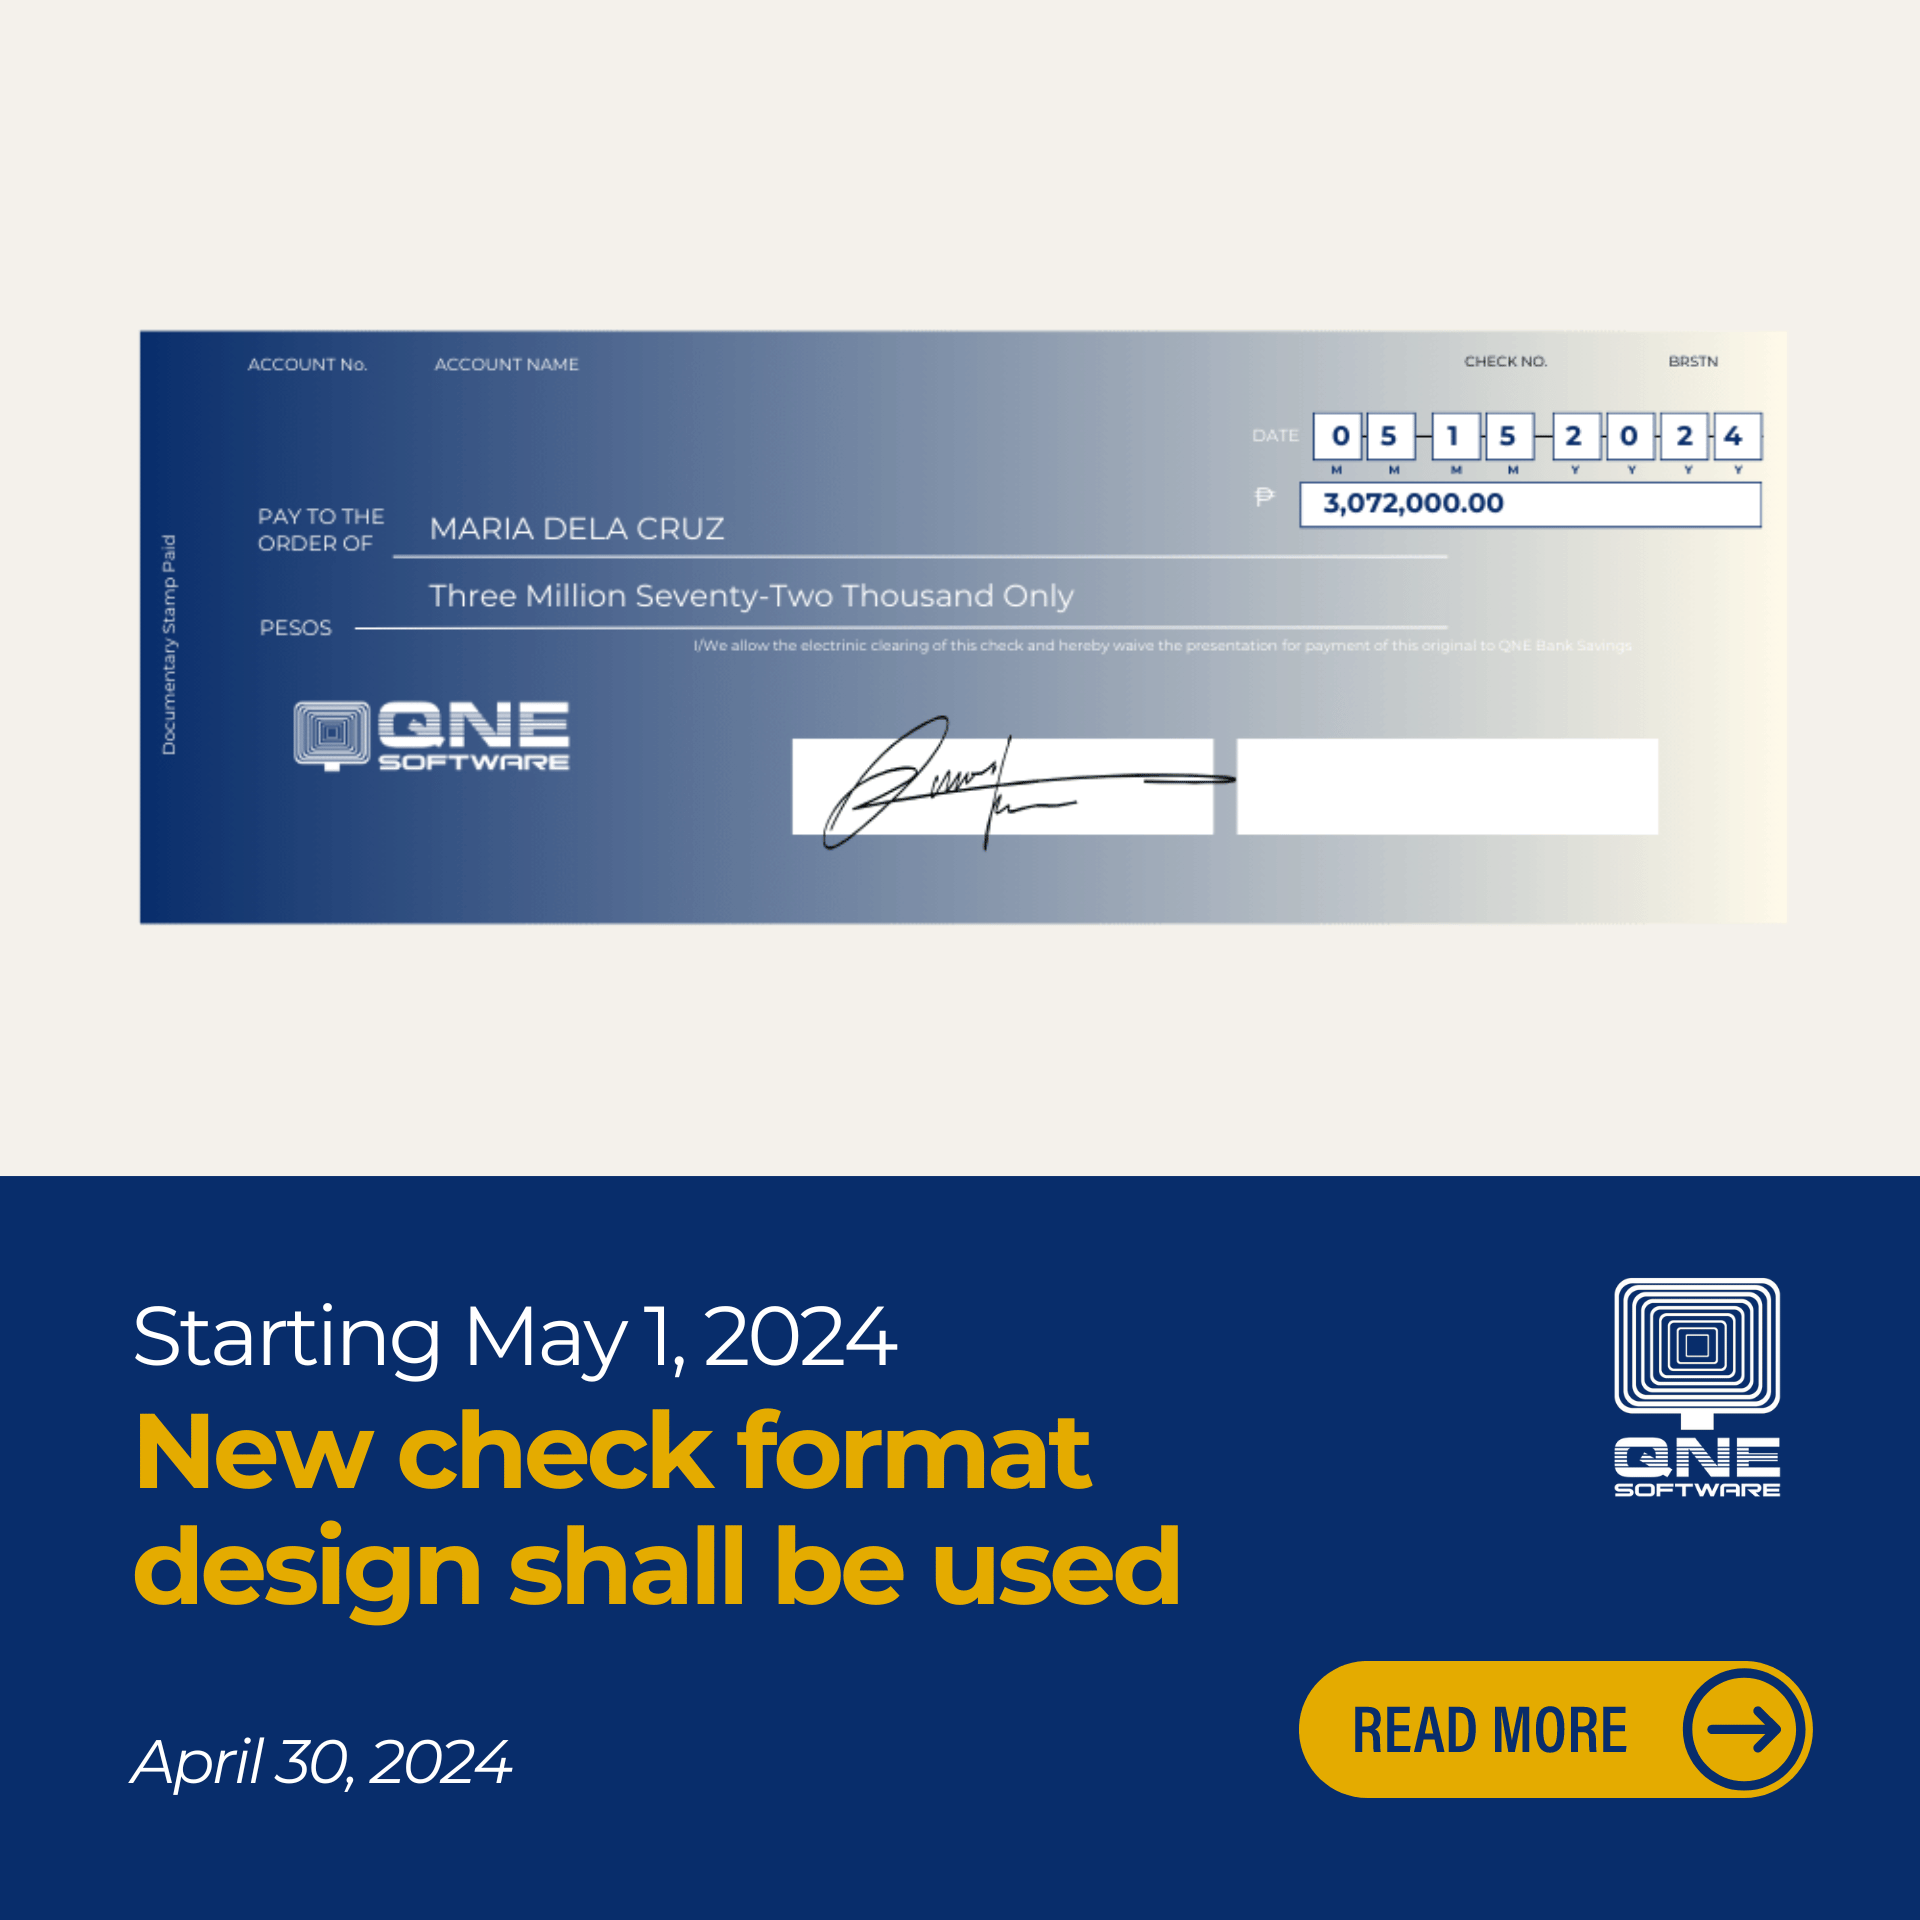 The New Check Format by May 1, 2024